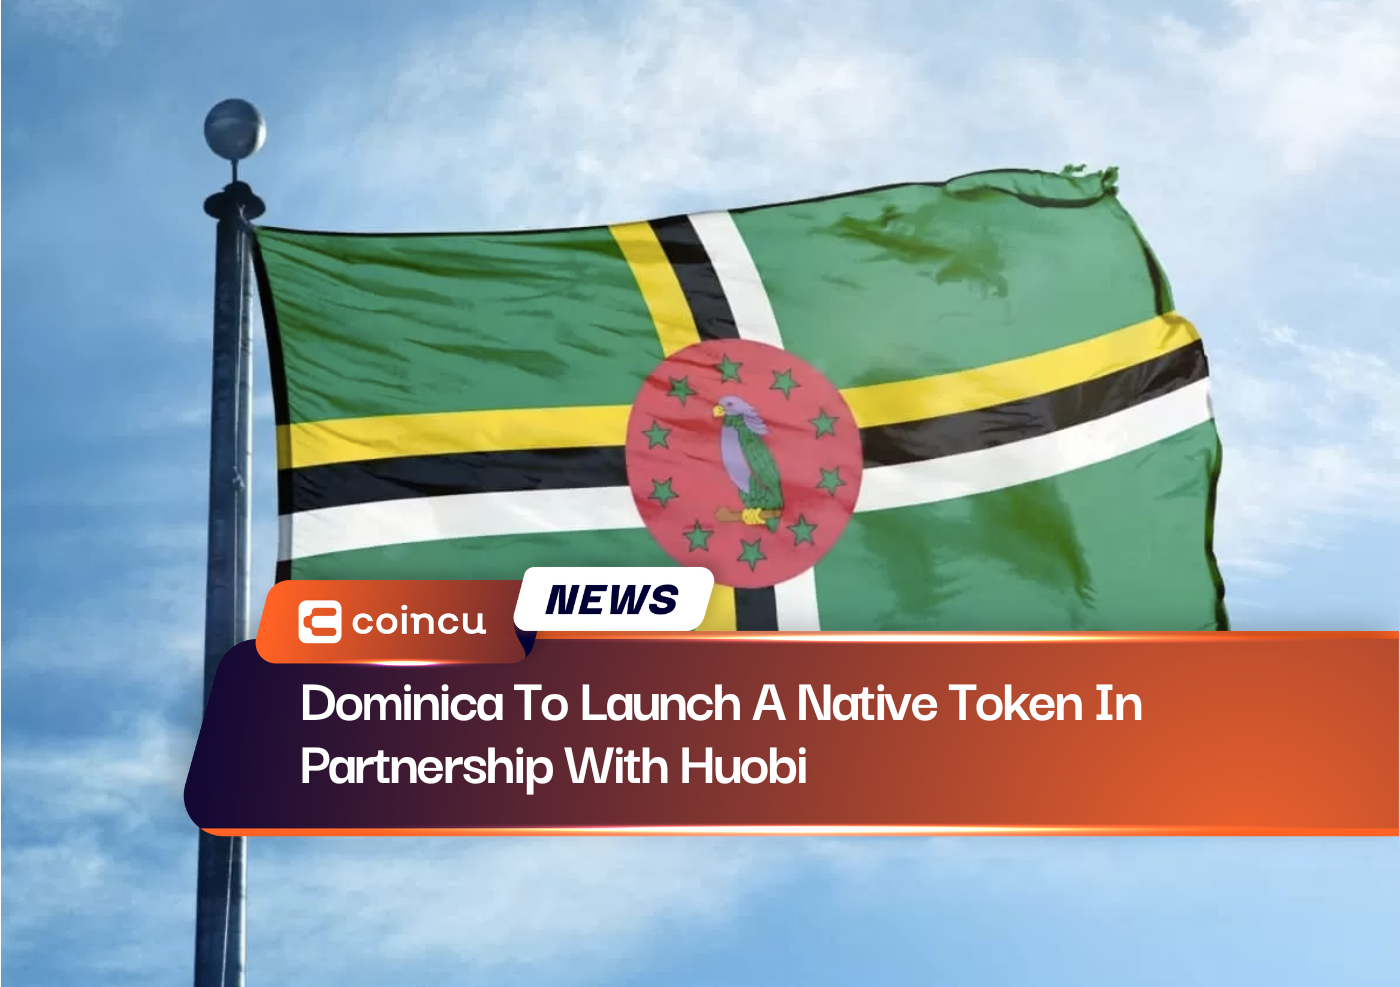 Dominica To Launch A Native Token In Partnership With Huobi